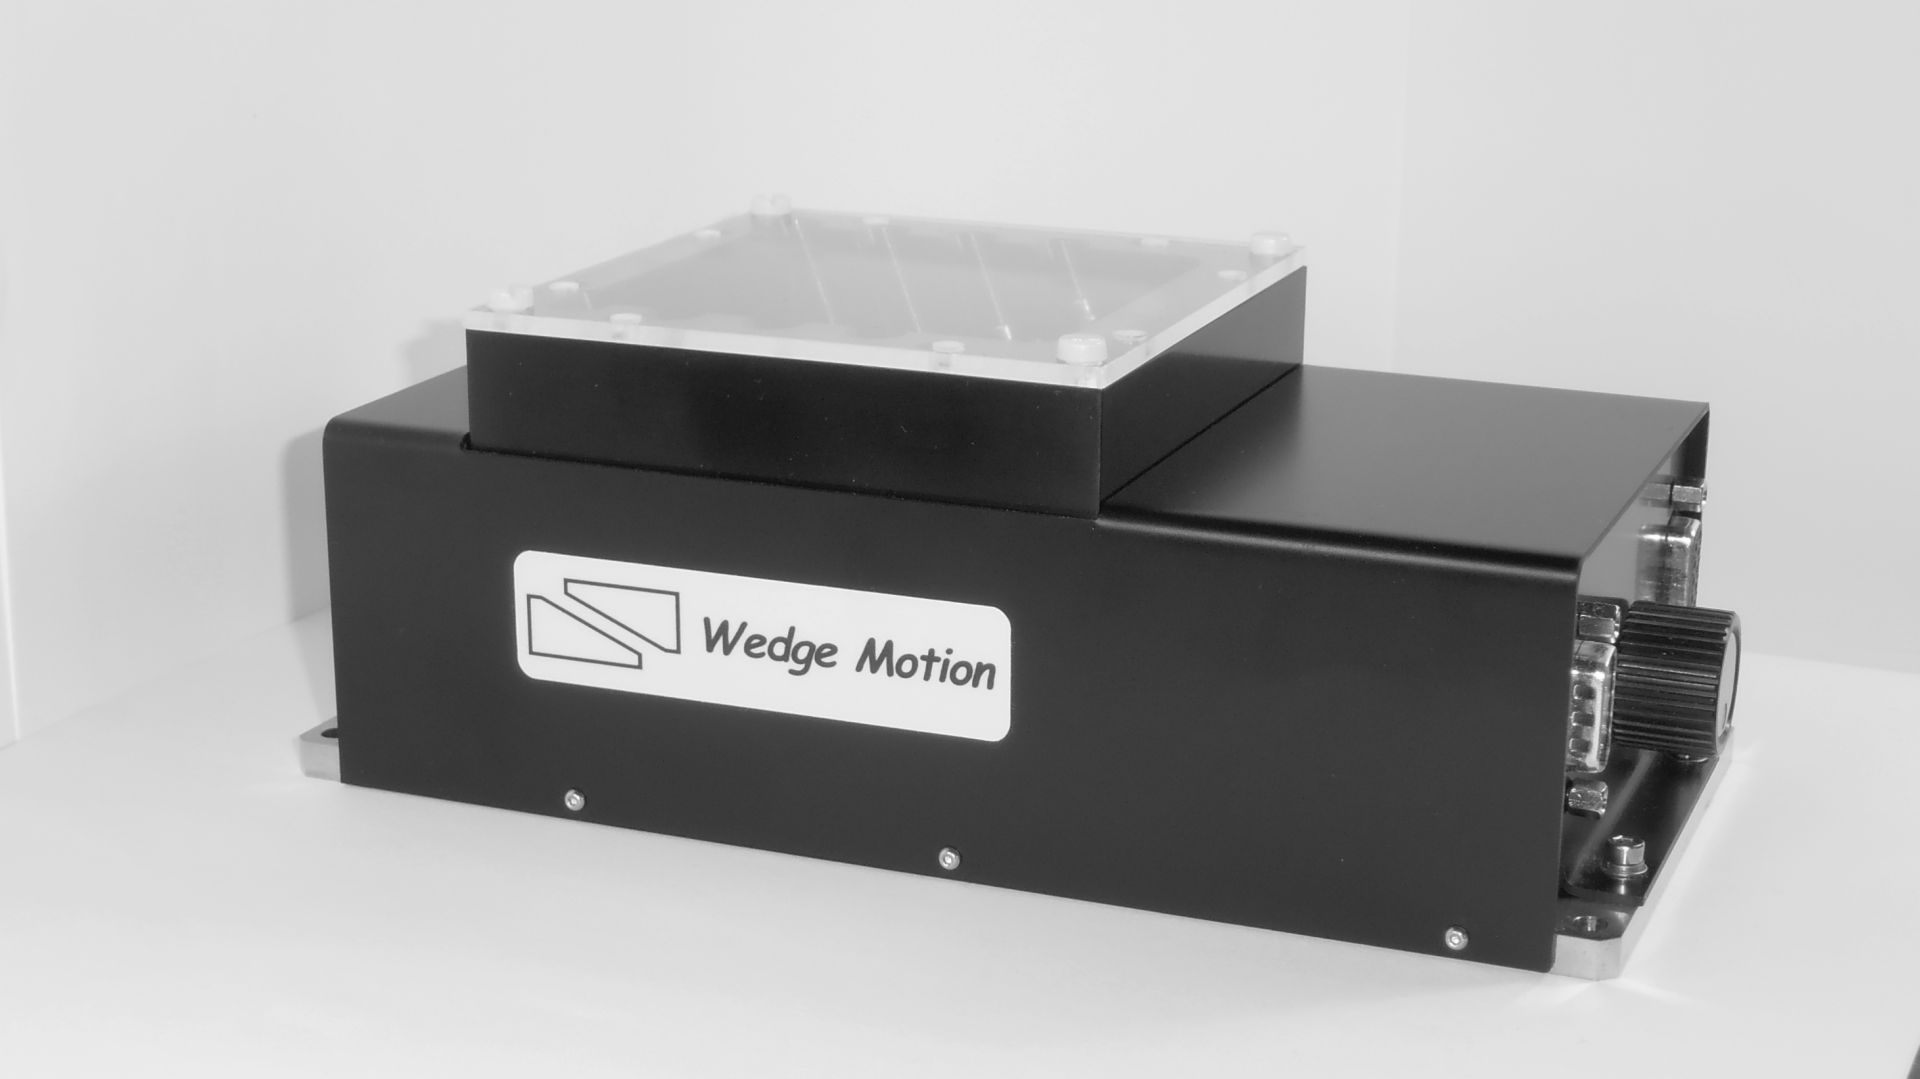 Motorized precision Z-axis stage by Wedge Motion